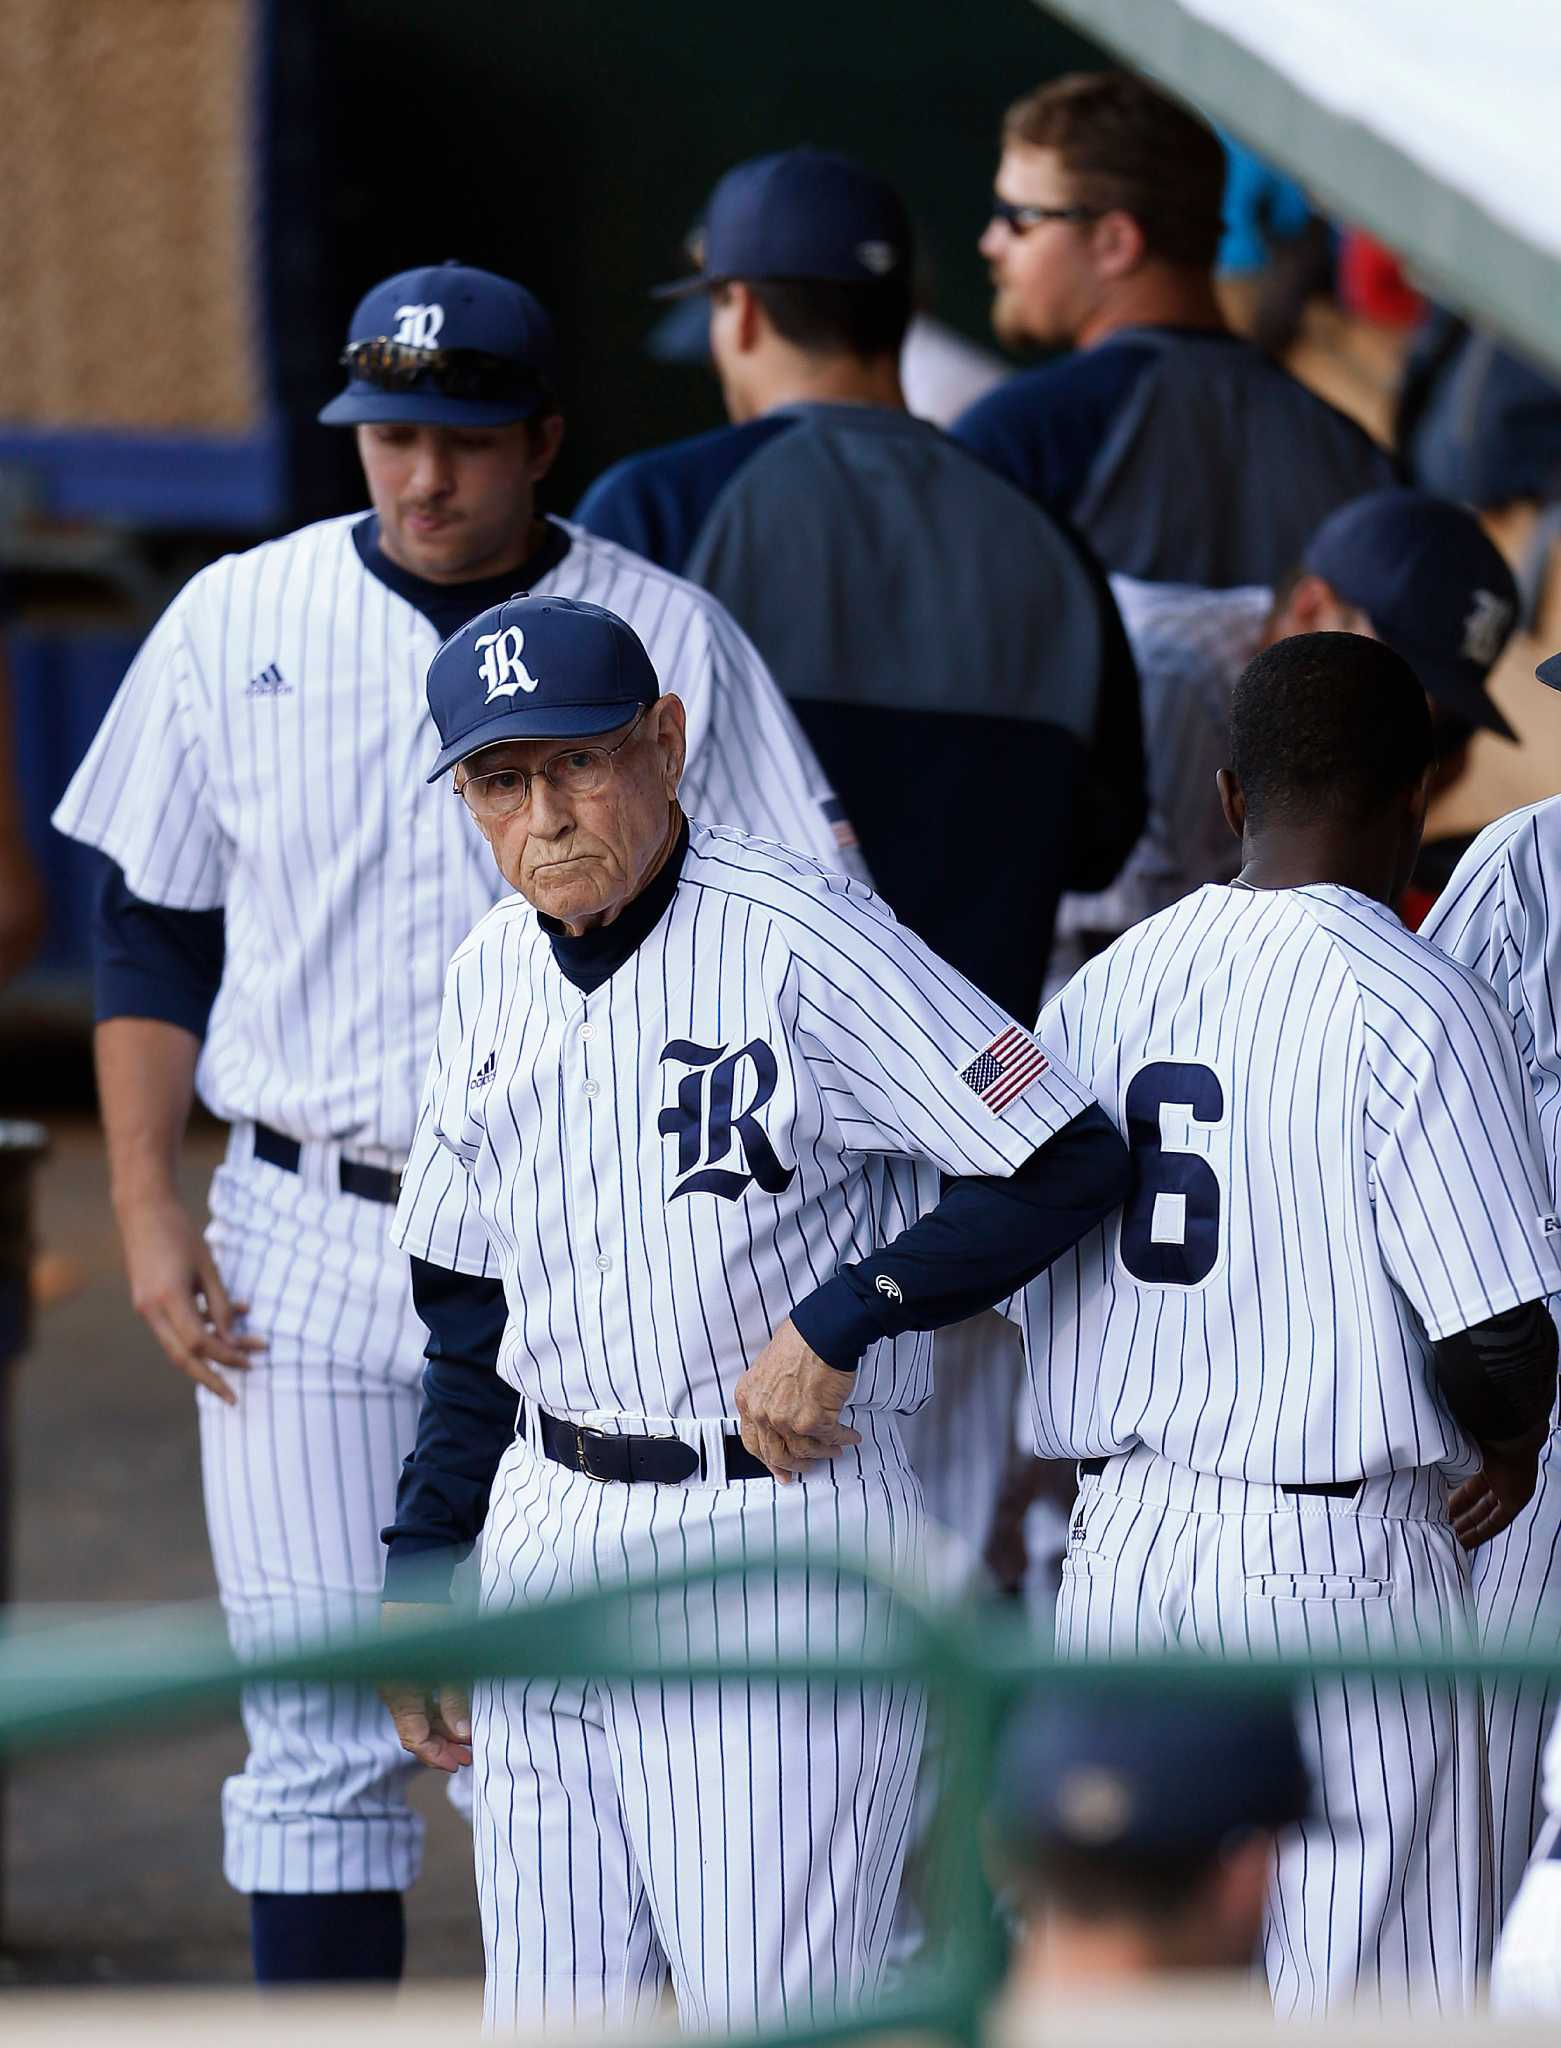 Five reasons why Rice baseball is contending again